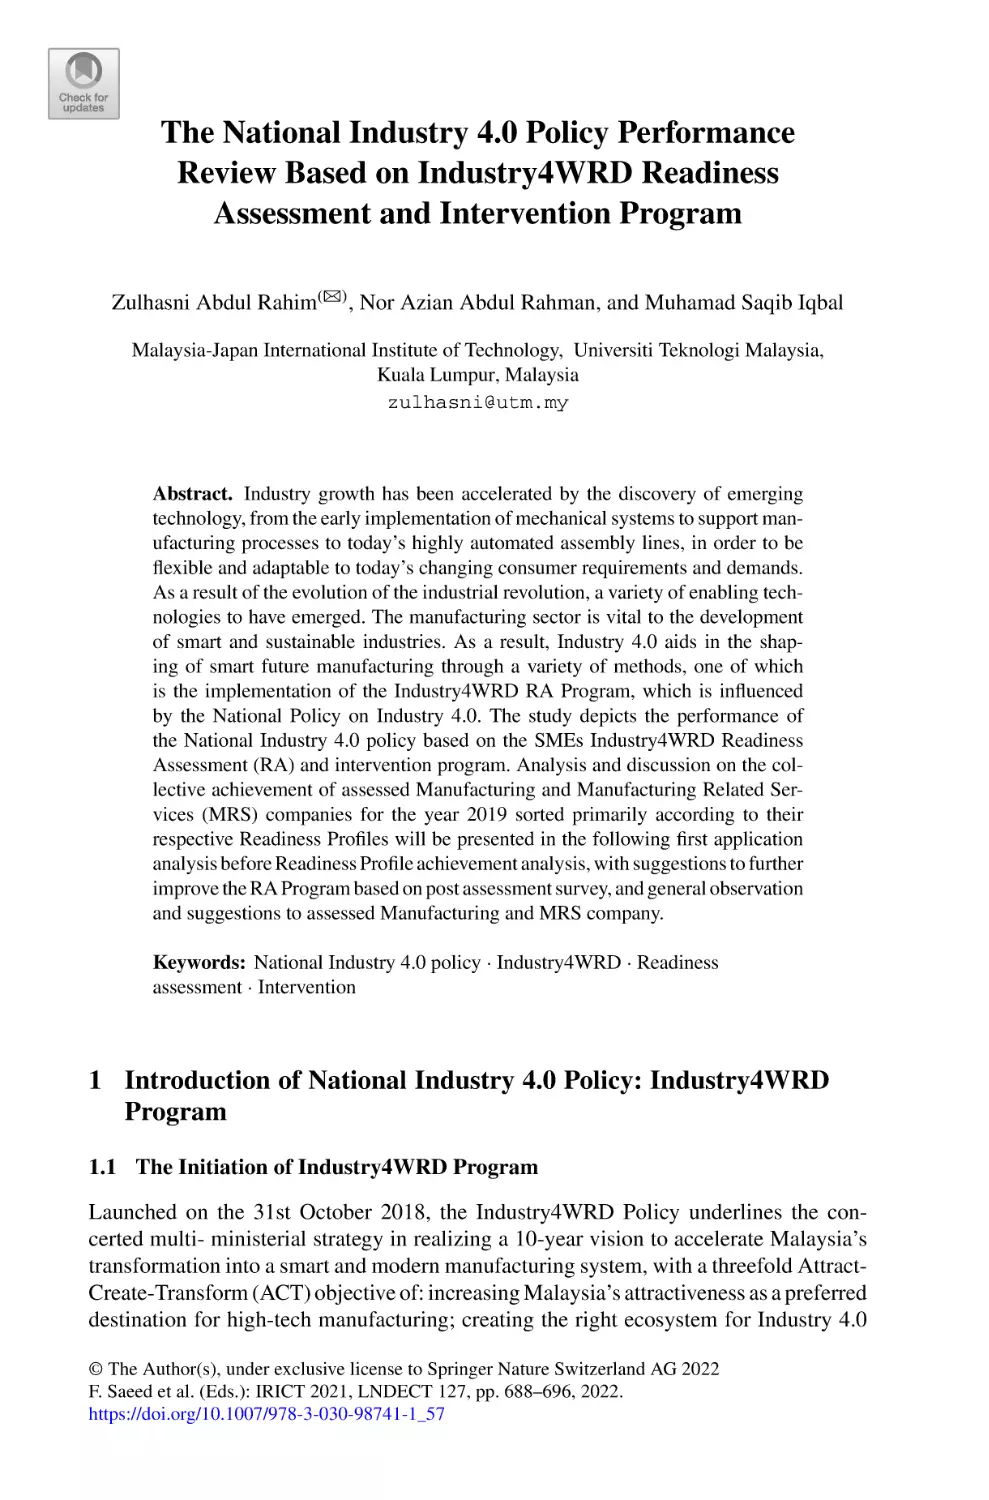 The National Industry 4.0 Policy Performance Review Based on Industry4WRD Readiness Assessment and Intervention Program
1 Introduction of National Industry 4.0 Policy
1.1 The Initiation of Industry4WRD Program